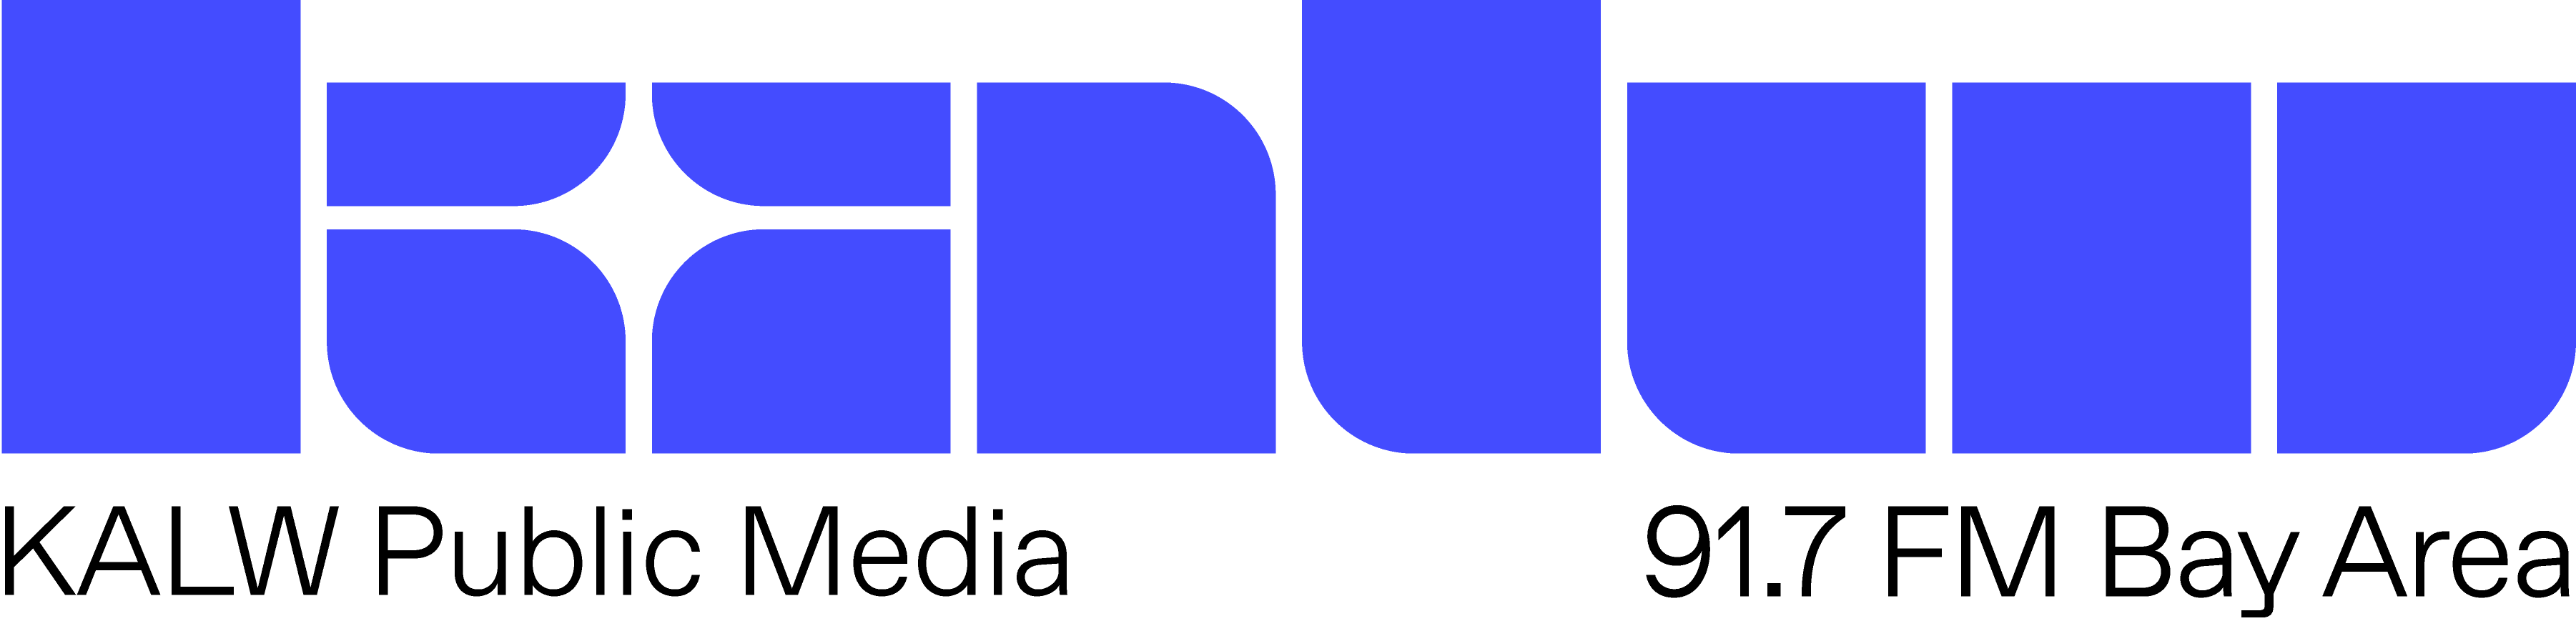 KALW's new logo was designed by COLLINS.